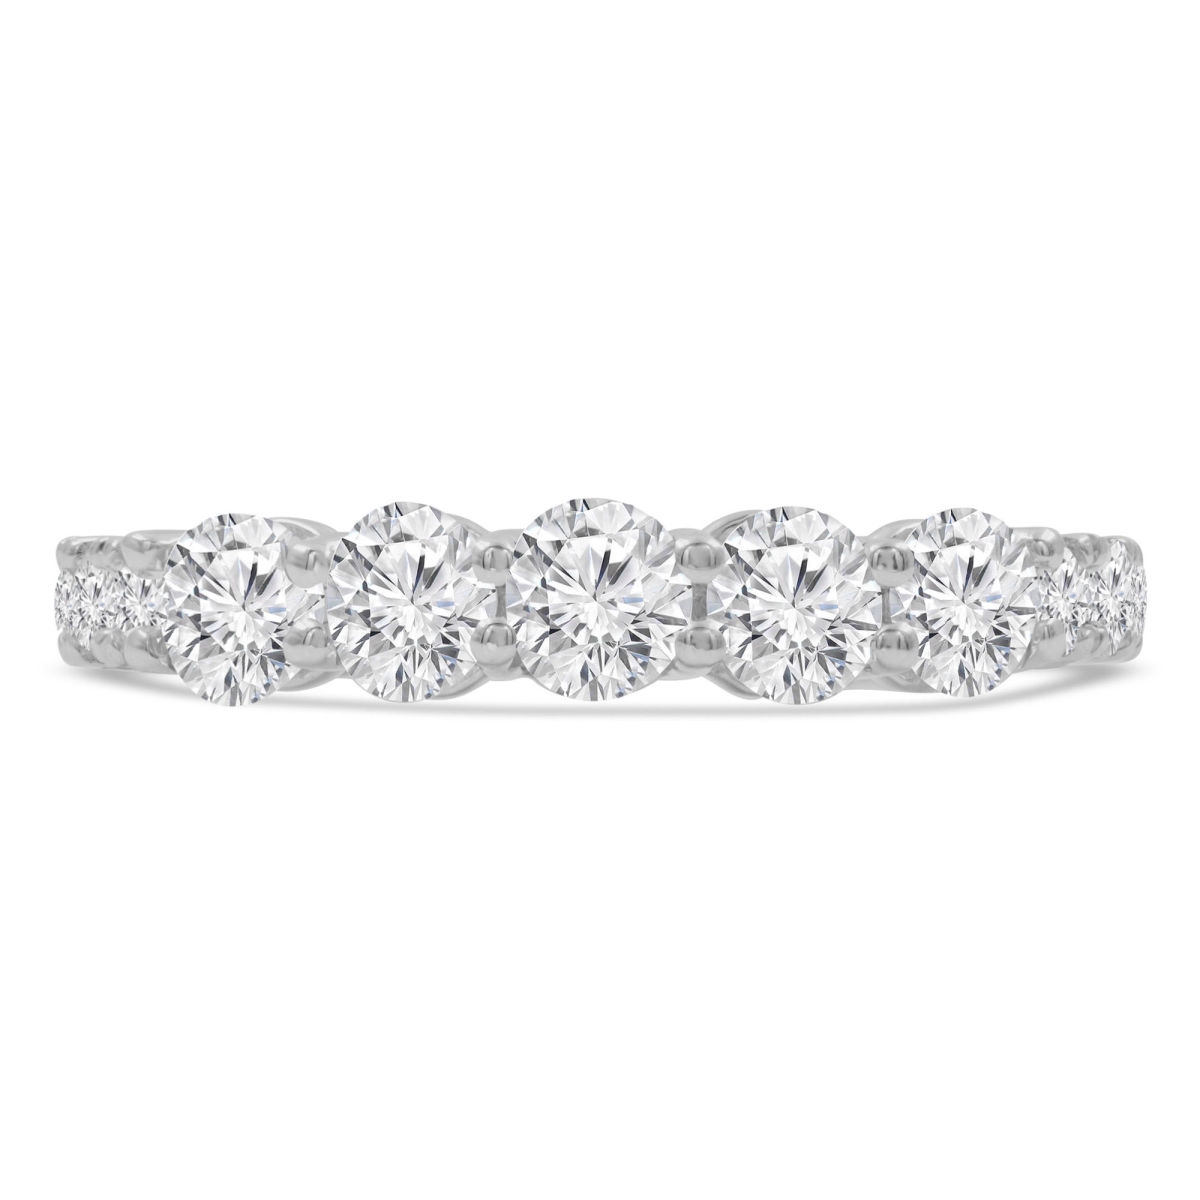 Picture of Majesty Diamonds MD210372-9 1.4 CTW Round Diamond Five-Stone Ring with Accents in 14K White Gold - Size 9